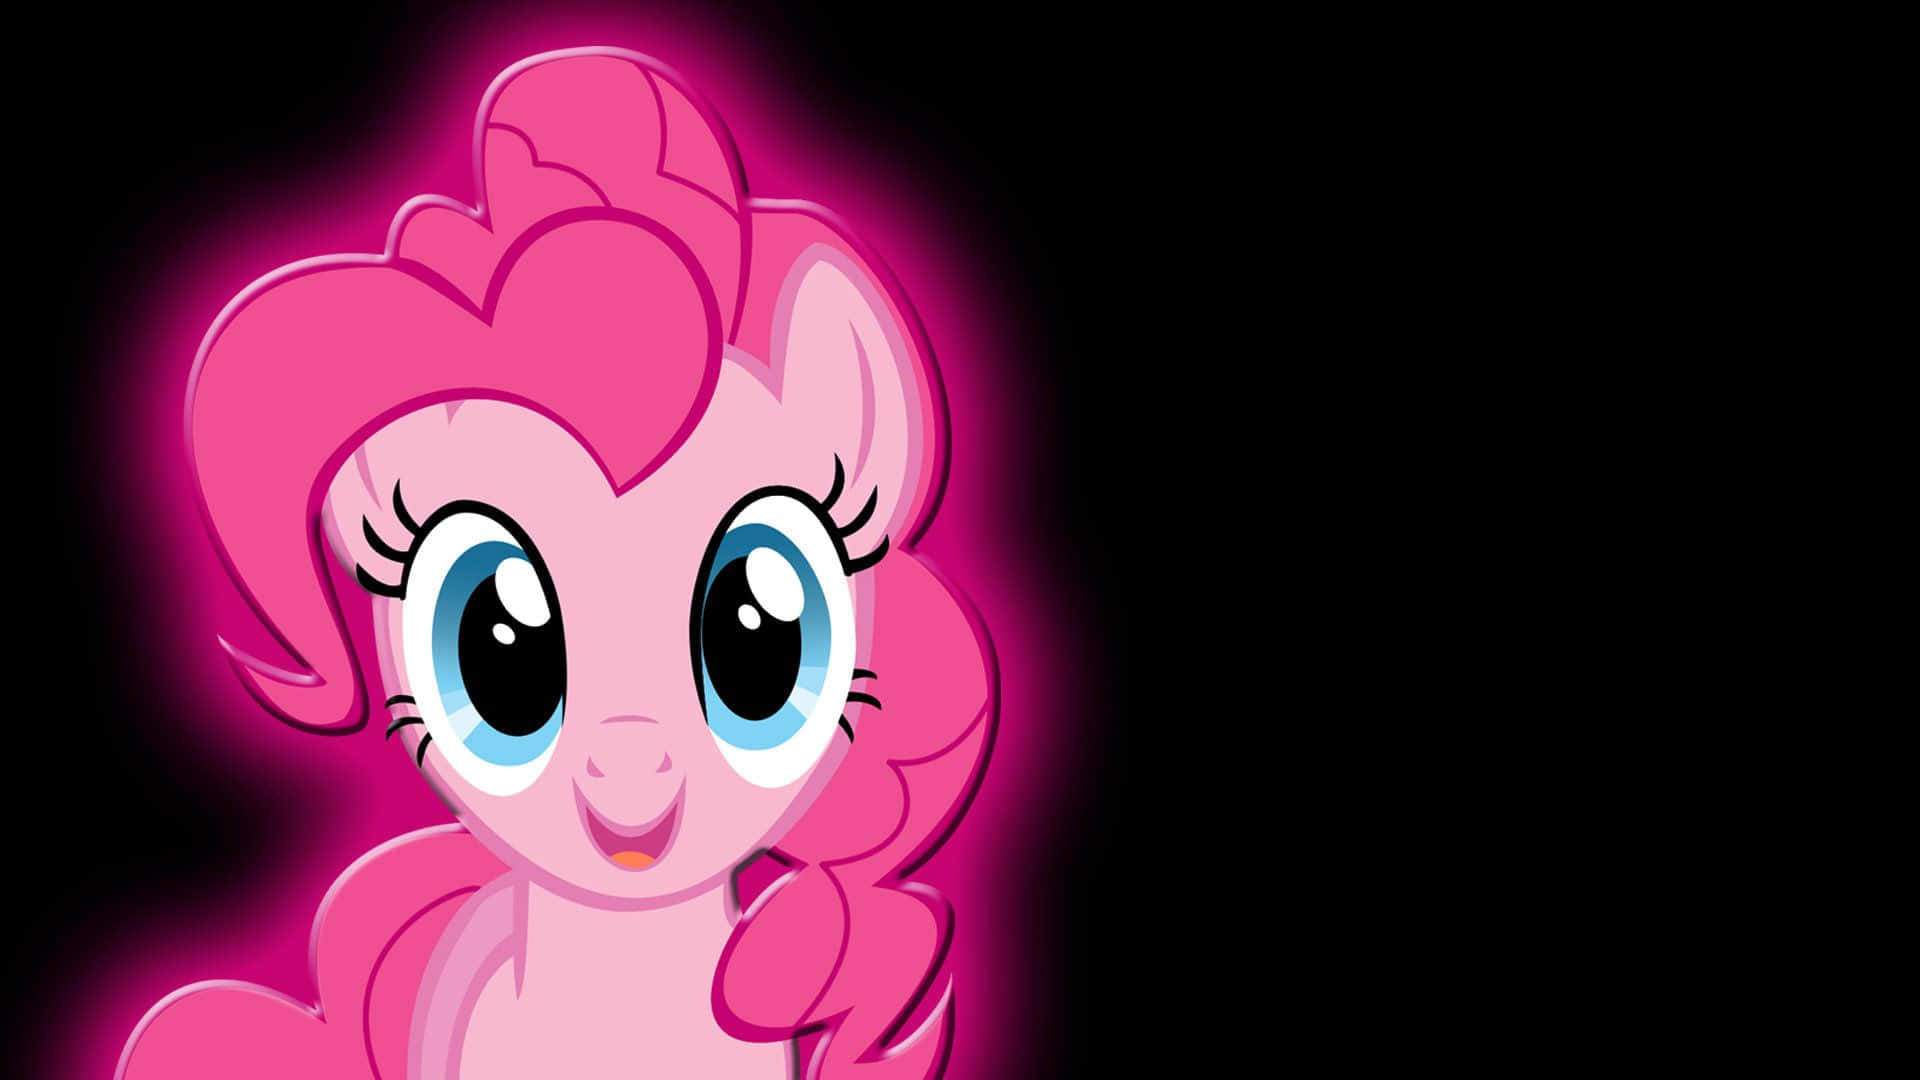 Life is too short to not have as much fun as Pinkie Pie!